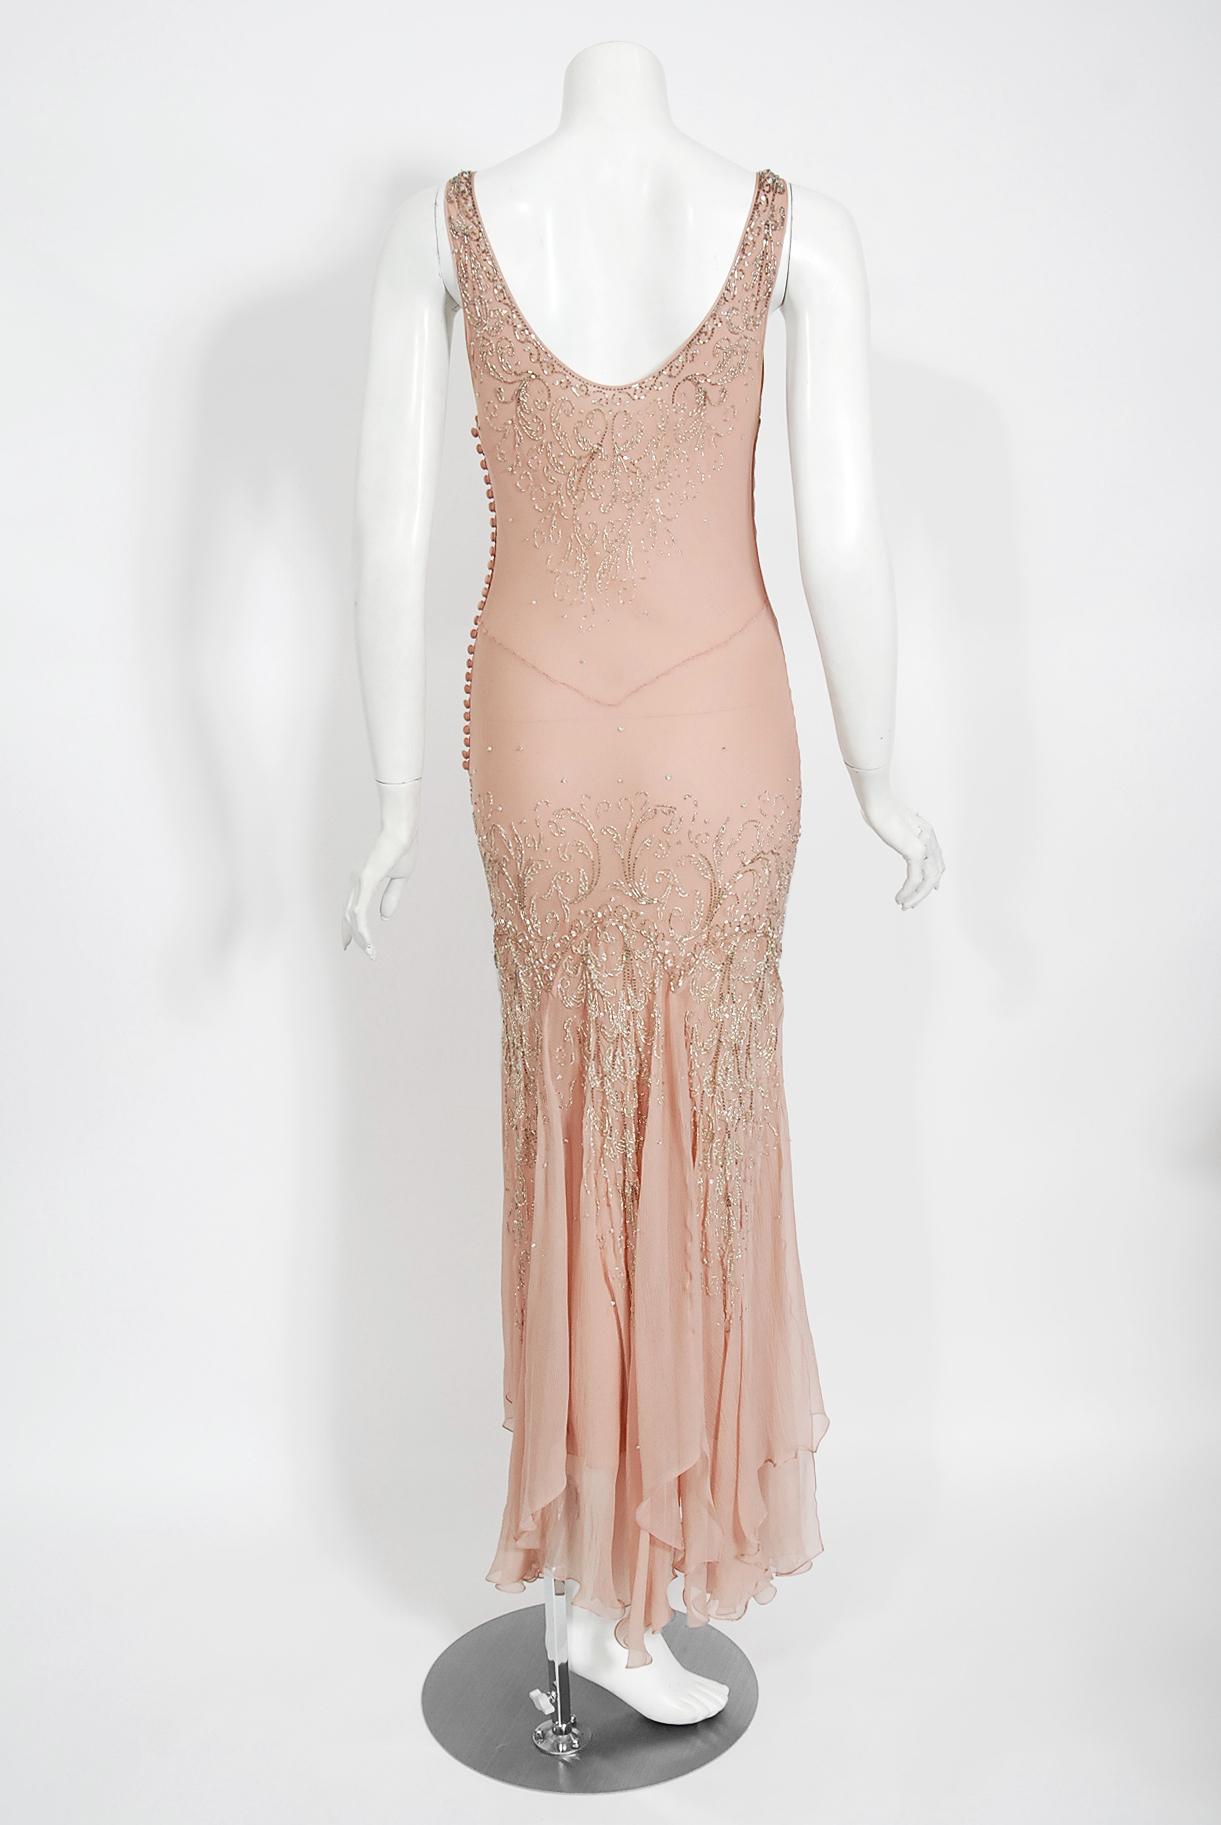 Vintage 2002 Christian Dior by Galliano Beaded Pale Pink Chiffon Bias-Cut Gown 4